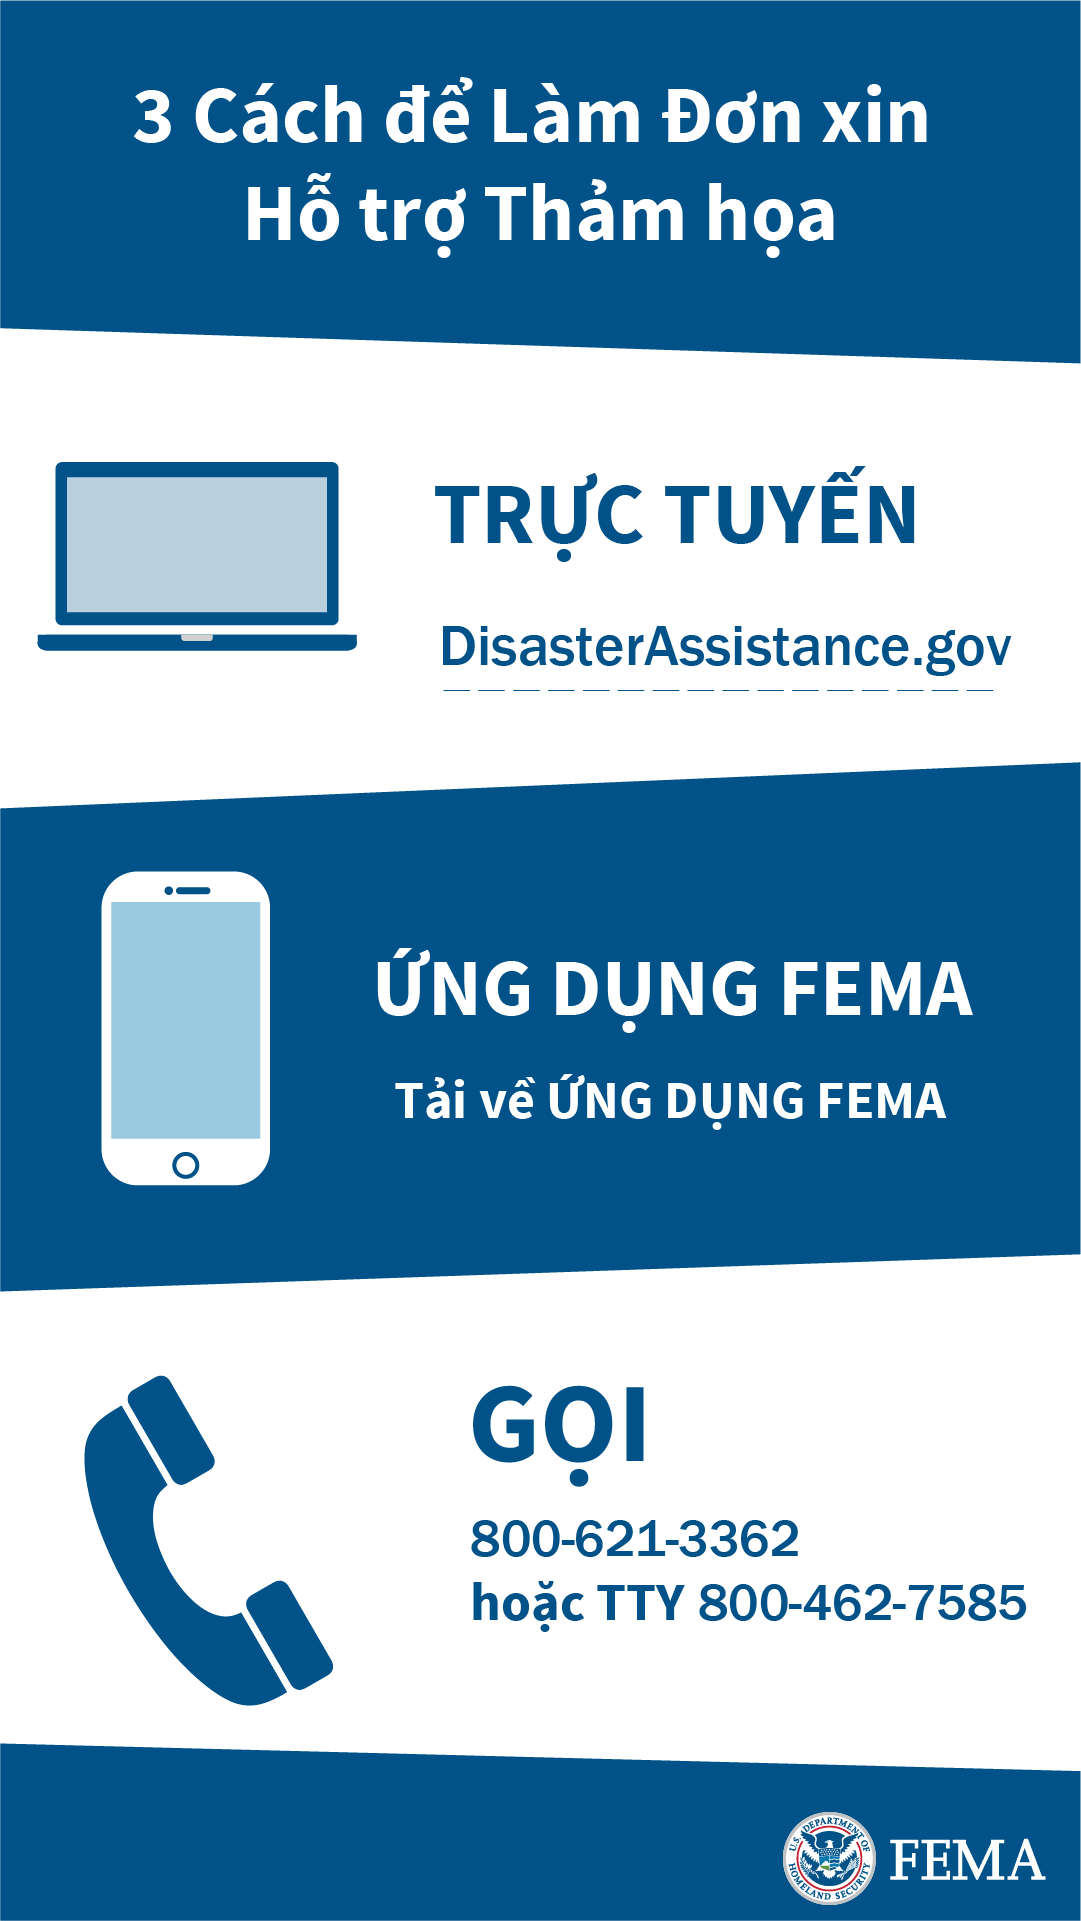 3 ways to apply for disaster aid (ig-story) (Vietnamese)